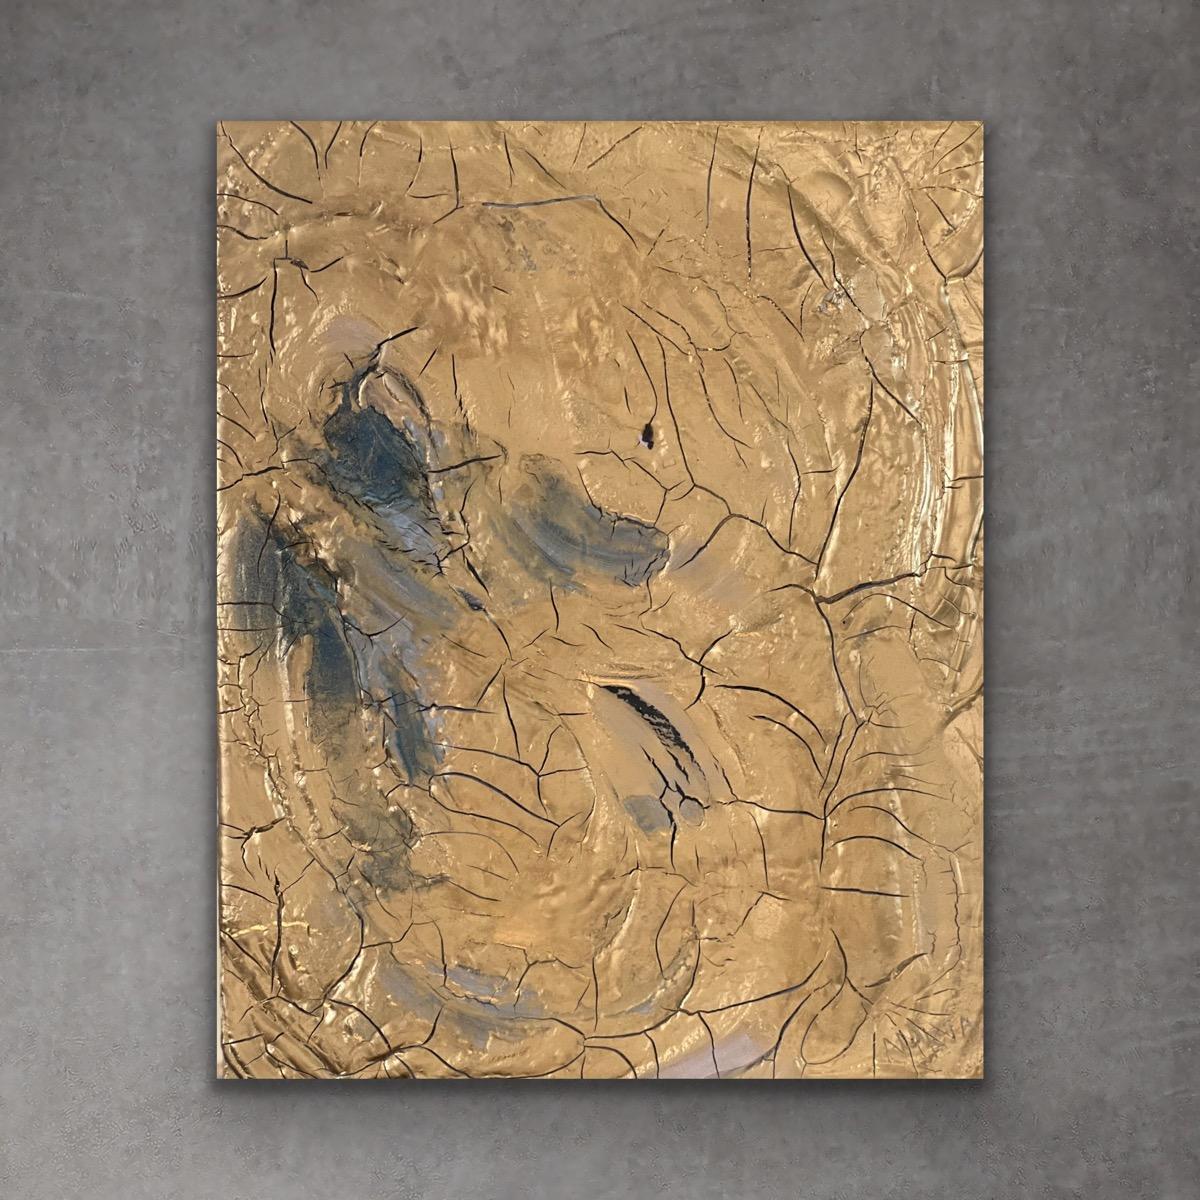 Multilayered, highly textured, shining gold highlights this piece. The rich oils shine through as the light changes throughout the day making this Amrta Art Gold Piece feel alive and like multiple paintings in one. Other Amrta Art pieces have sold